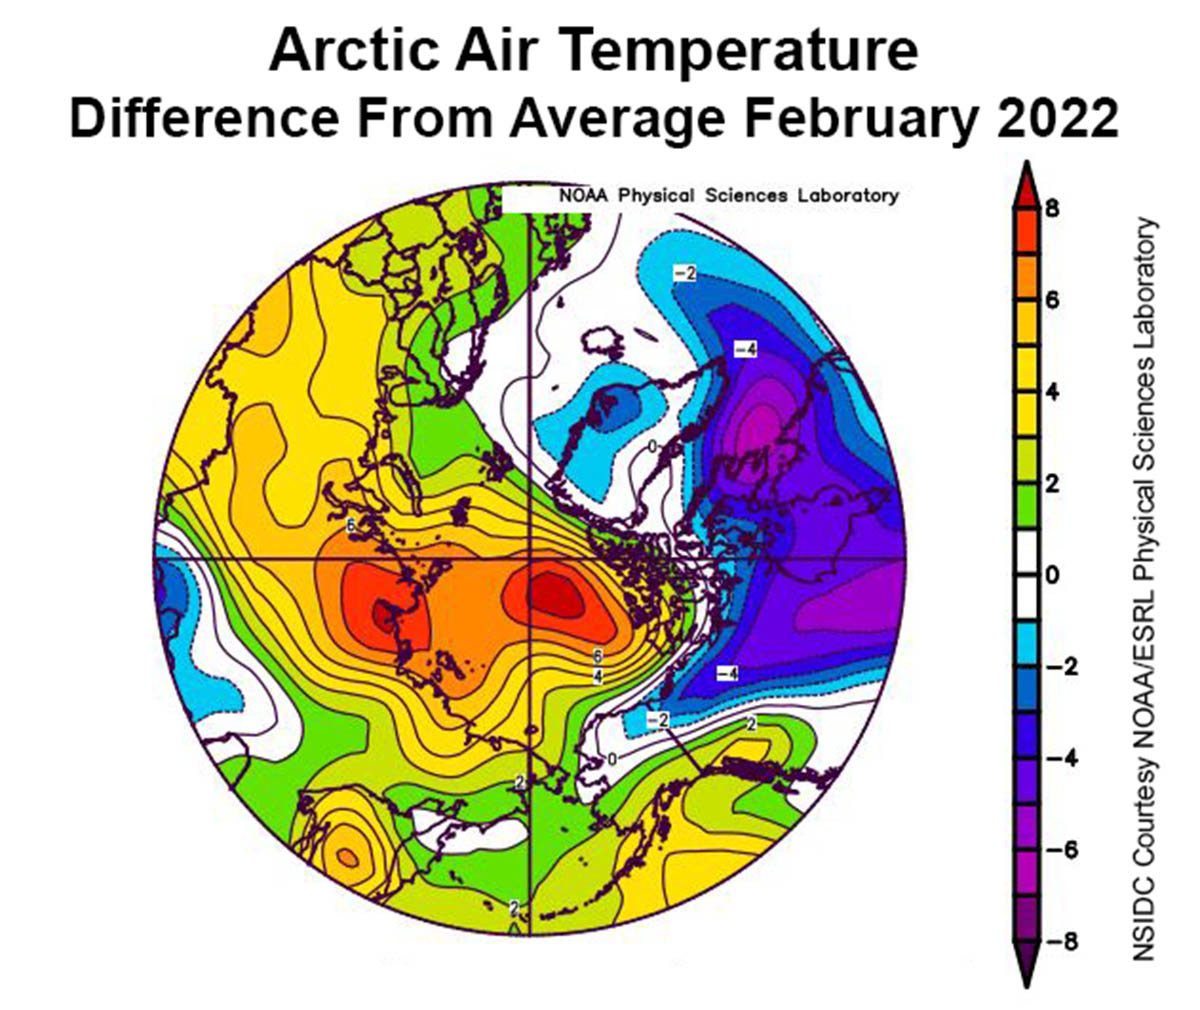 arctic-sea-ice-extent-suddenly-interrupts-a-good-growing-season-close-to-the-annual-maximum-temperature